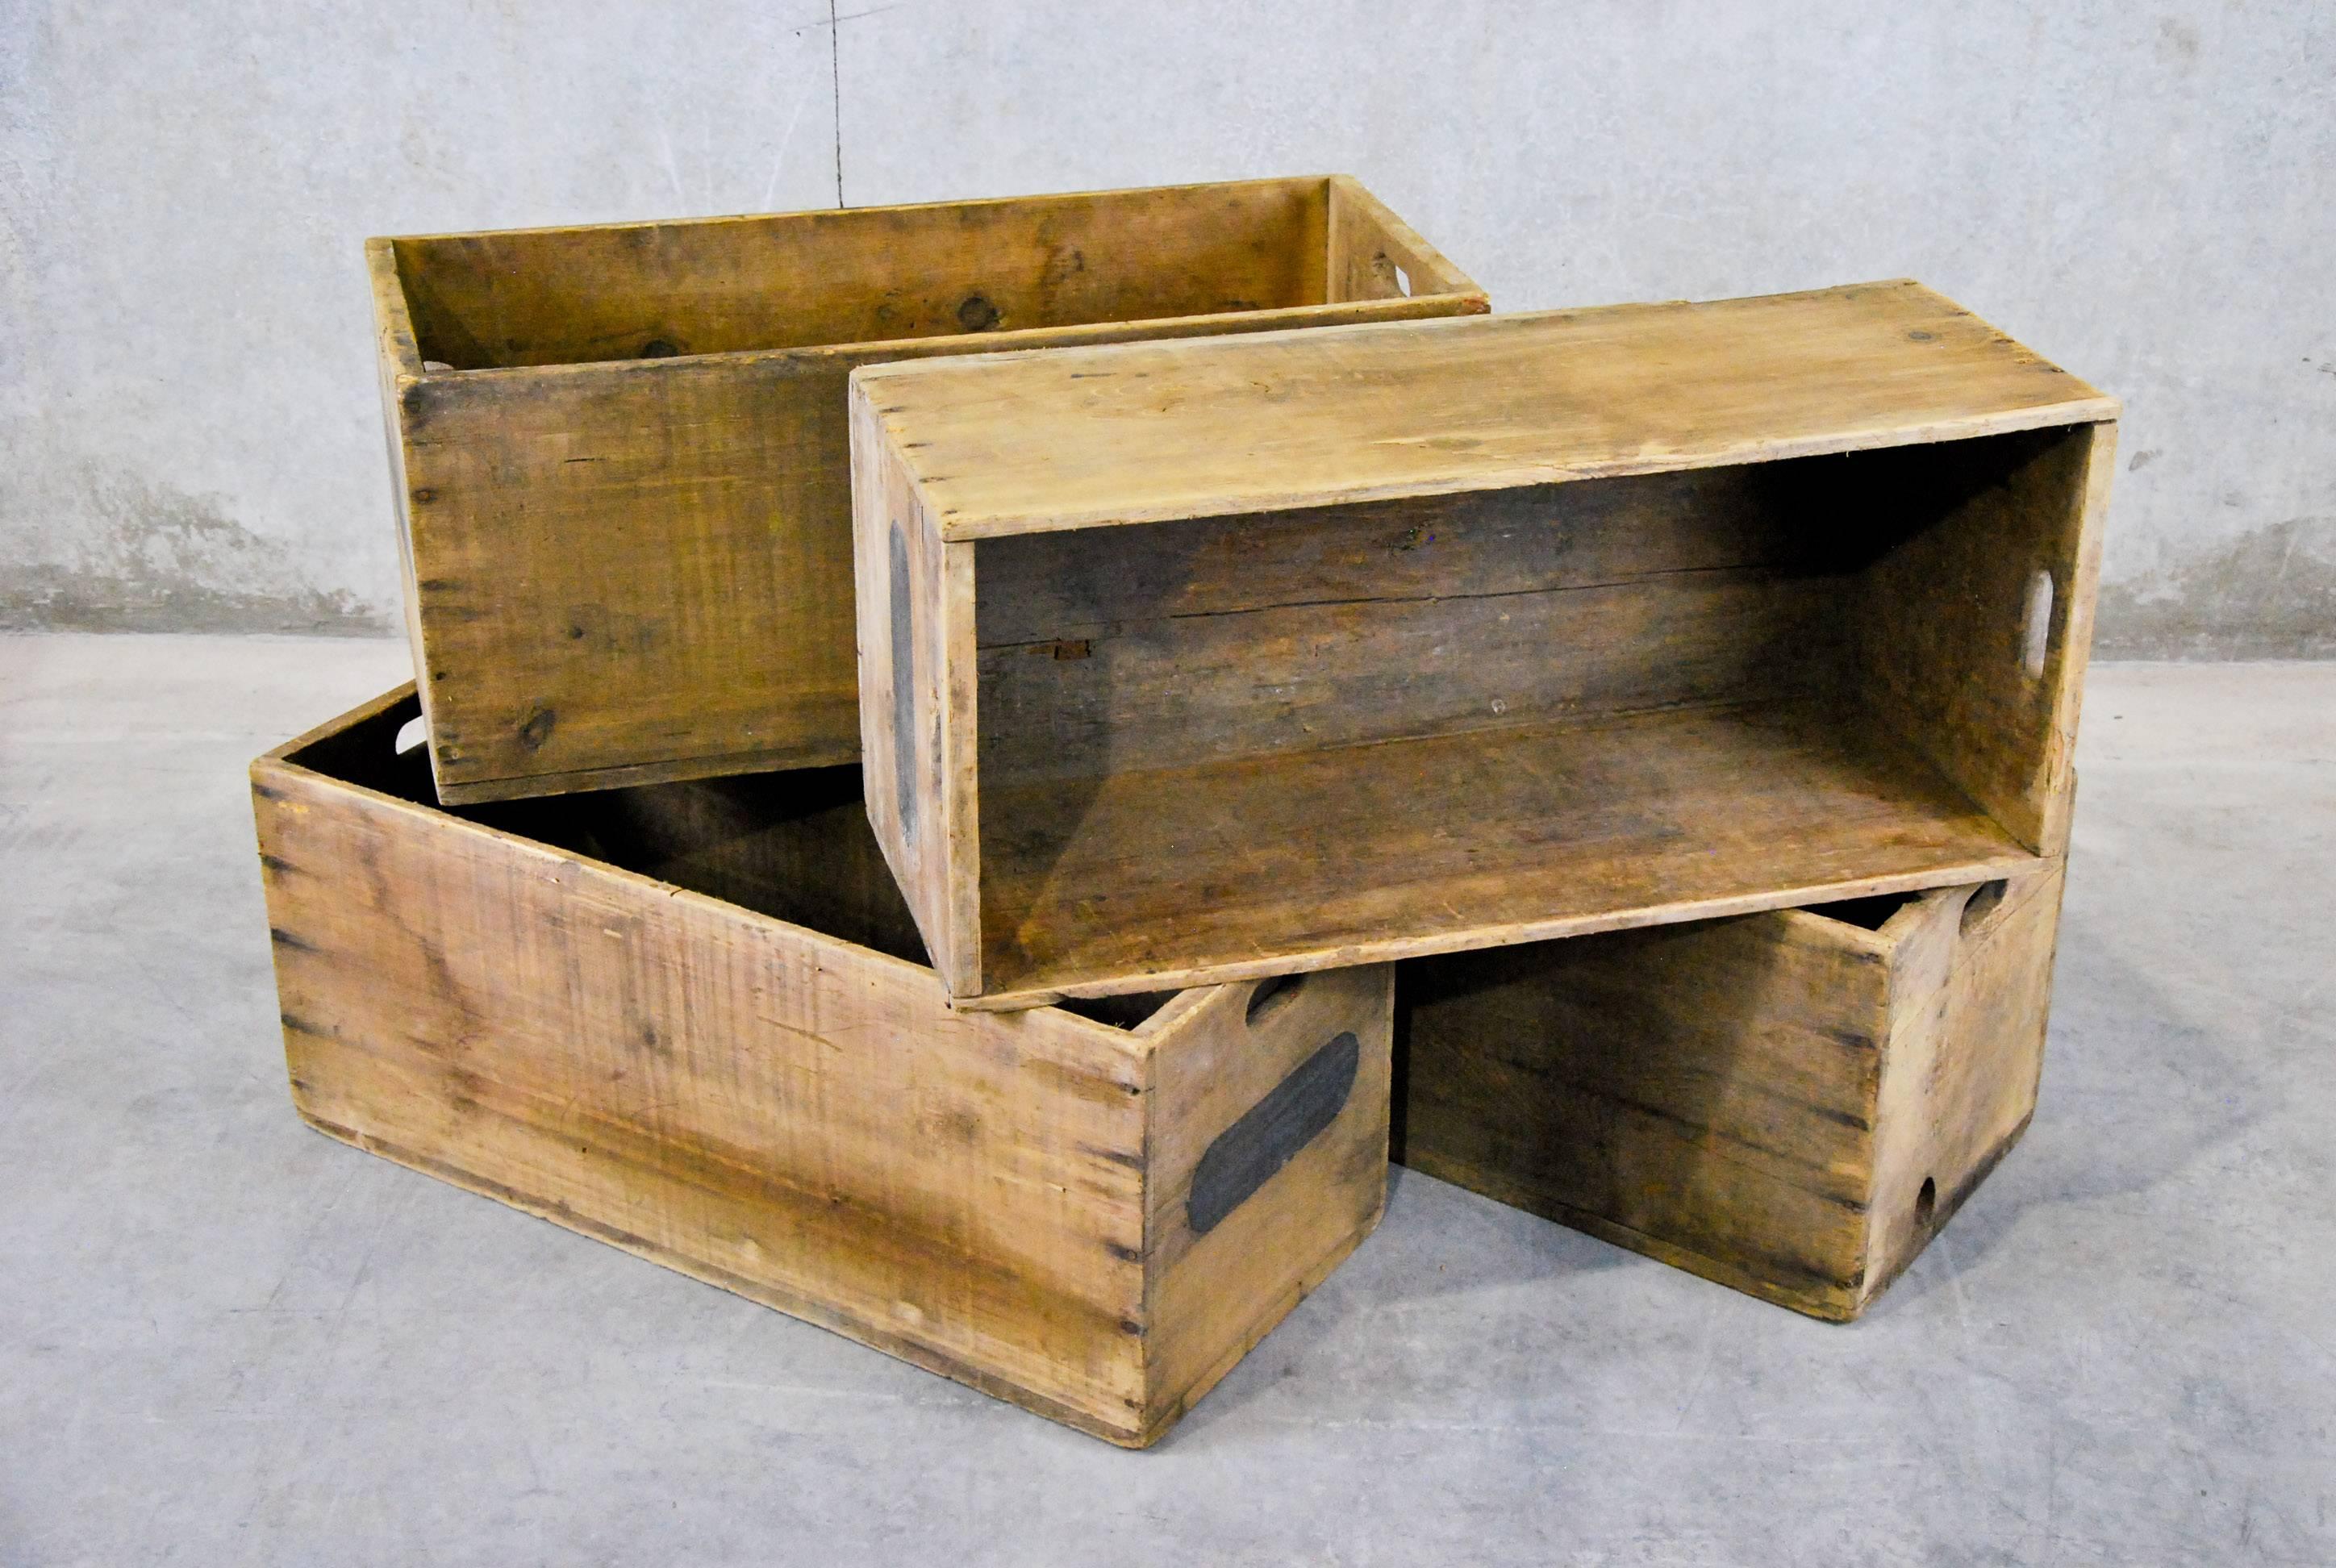 Group of five pine wooden bins from an old Mill in Ontario. solid 

The Rockwood woolen mills were established in 1867 by brothers John Richard, Thomas and Joseph Harris. Their business thrived and provided many artisan goods, with advertisements